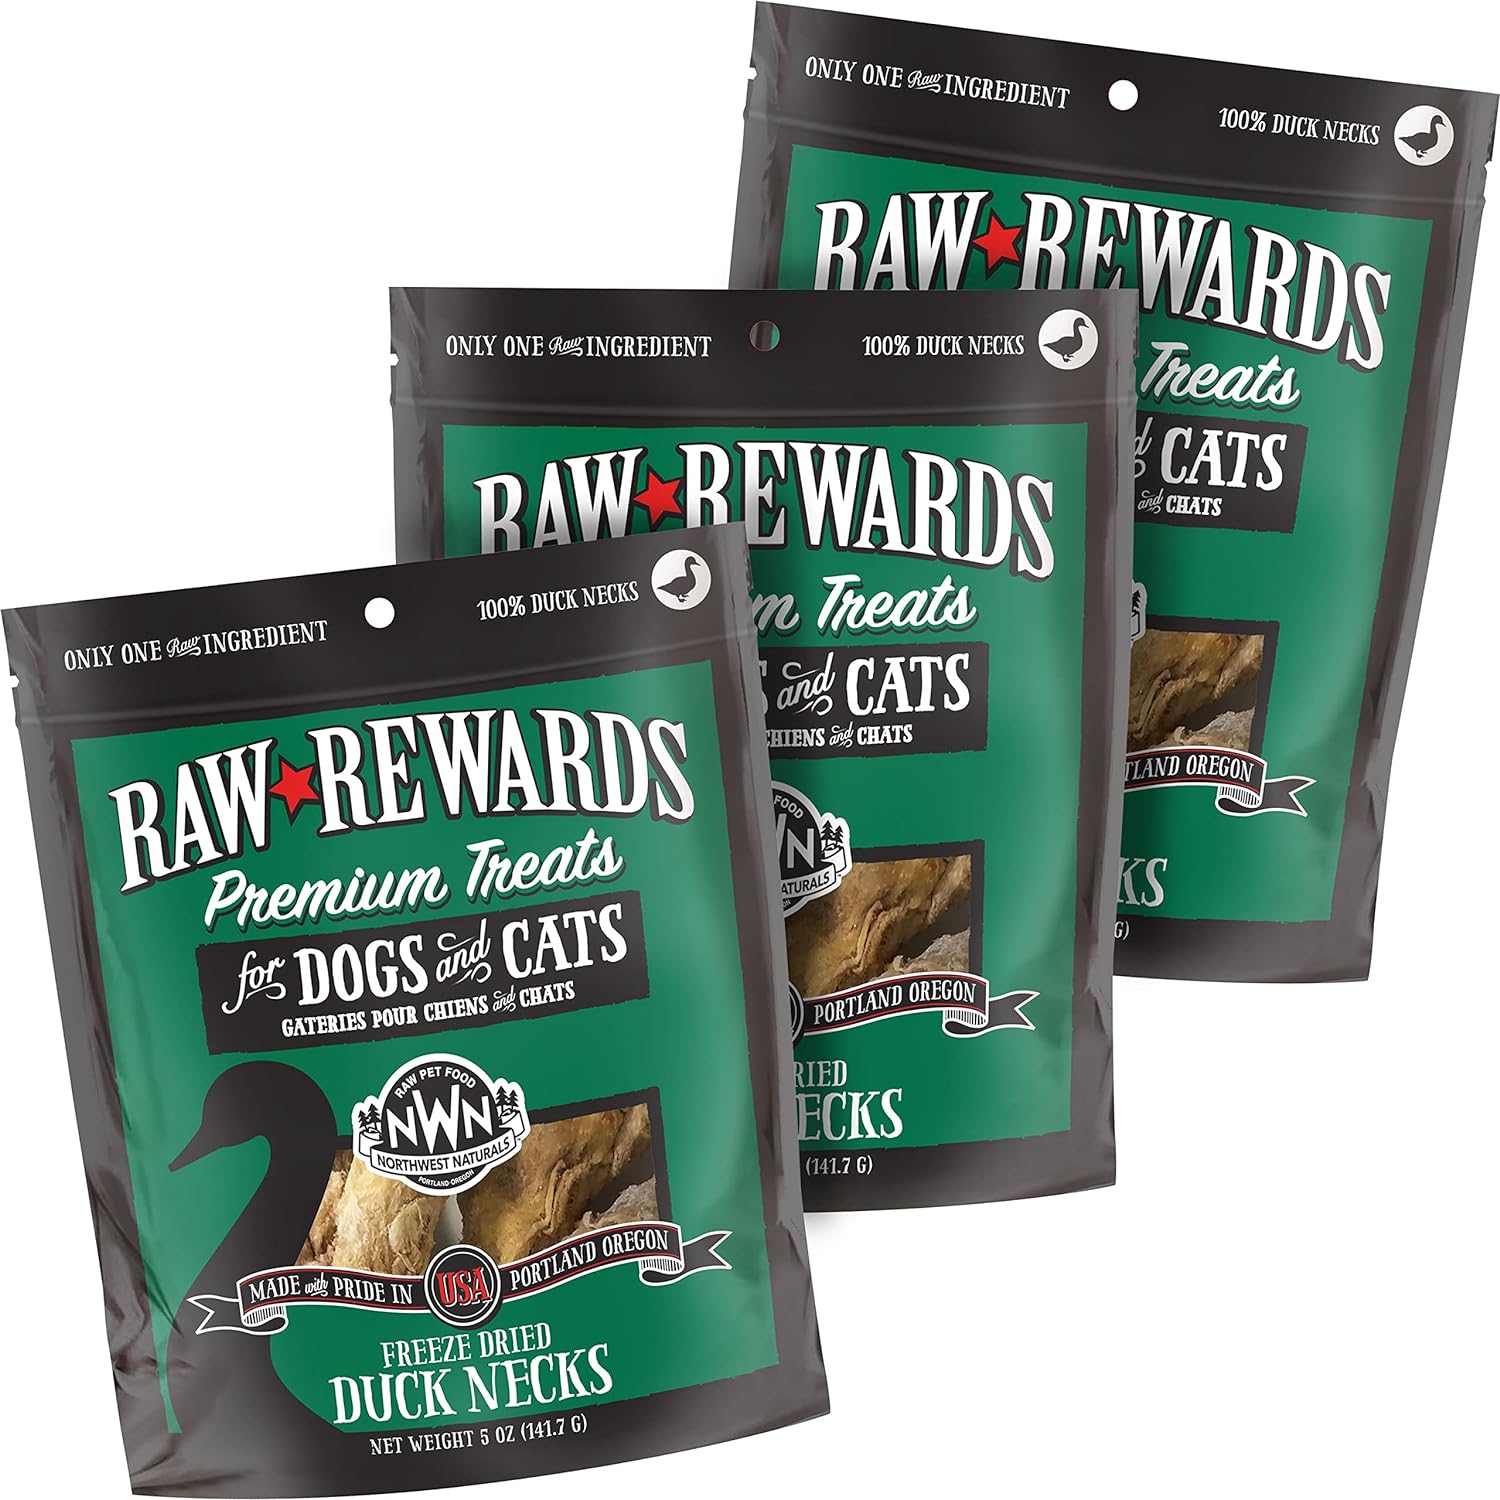 Northwest Naturals Raw Rewards Freeze-Dried Duck Neck Treats for Dogs and Cats - Bite-Sized Pieces - Healthy, 1 Ingredient, Human Grade Pet Food, All Natural - 5 Oz (Pack of 3) (Packaging May Vary)